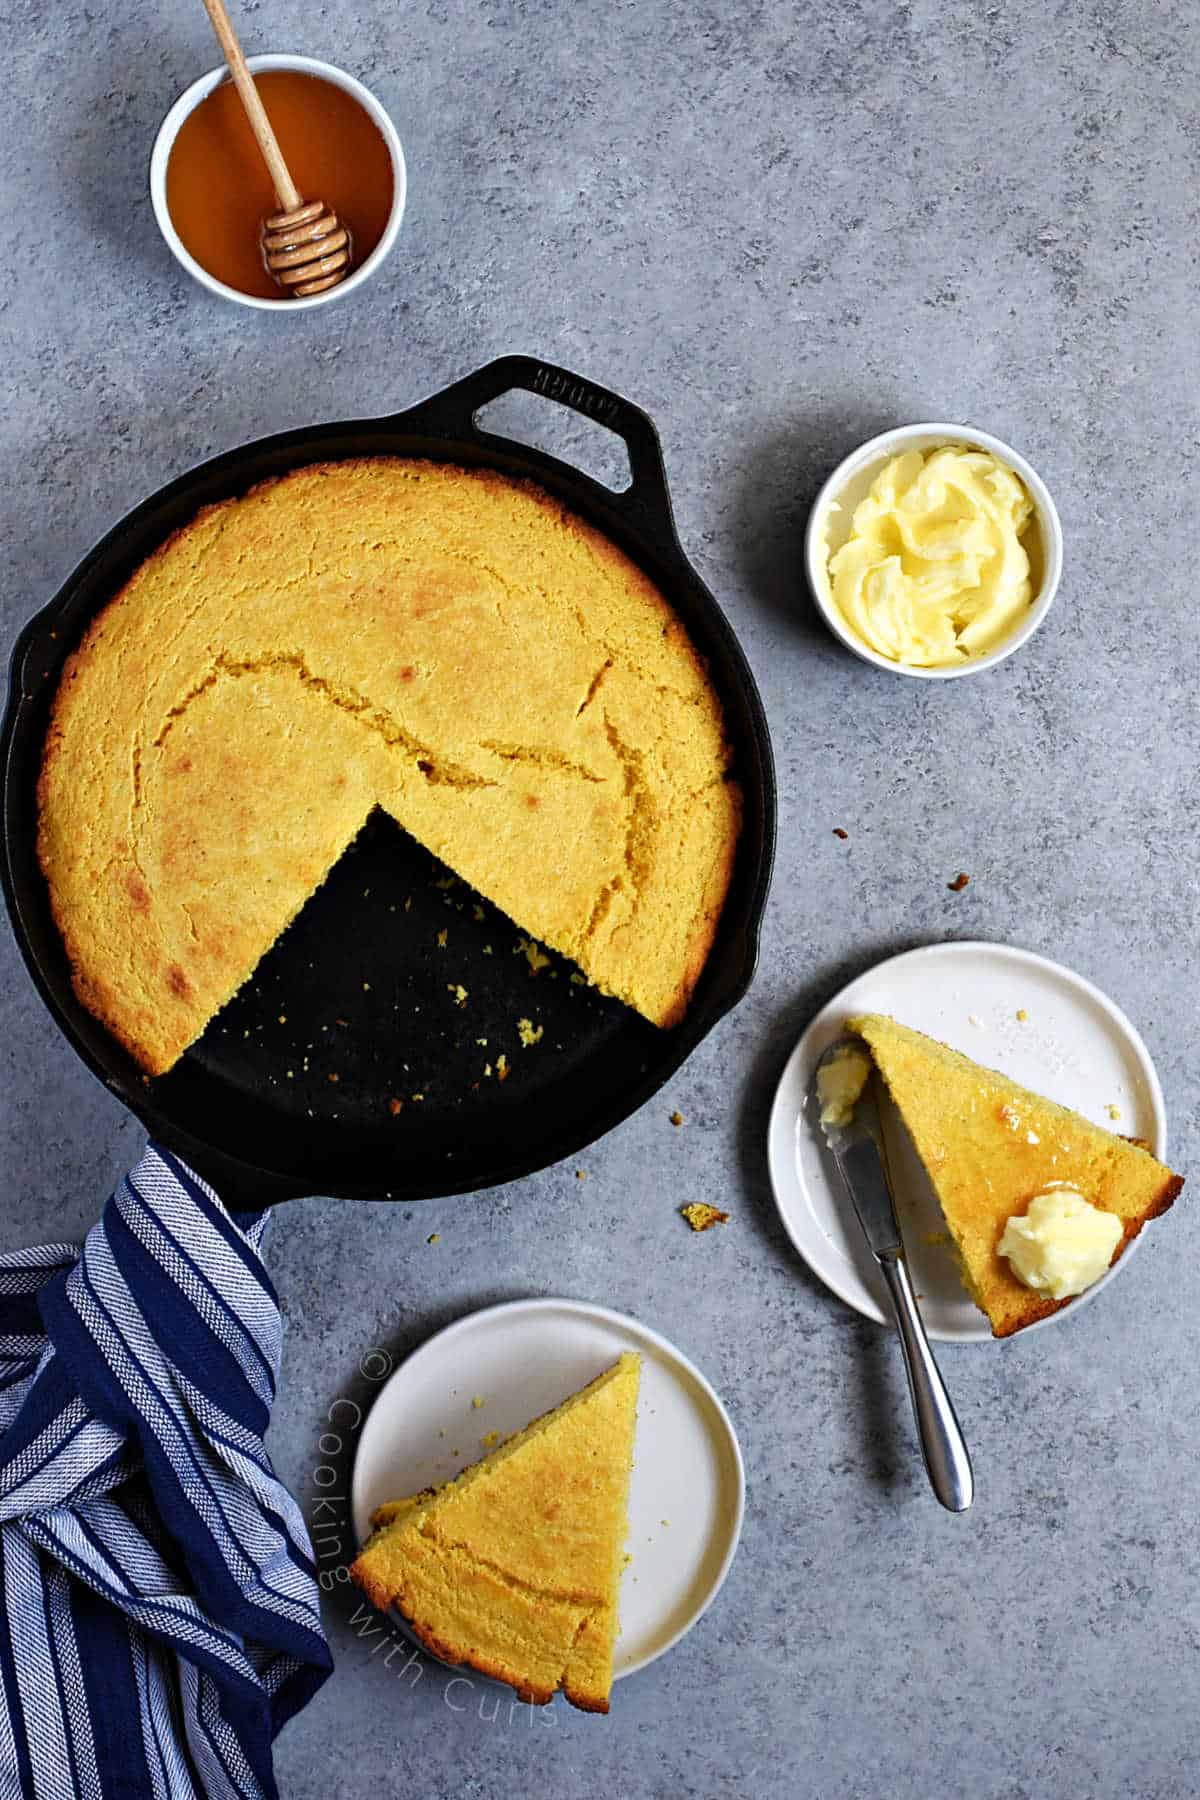 Looking down on cornbread baked in a cast iron skillet with two slices cut out and placed on small plates topped with butter and honey.